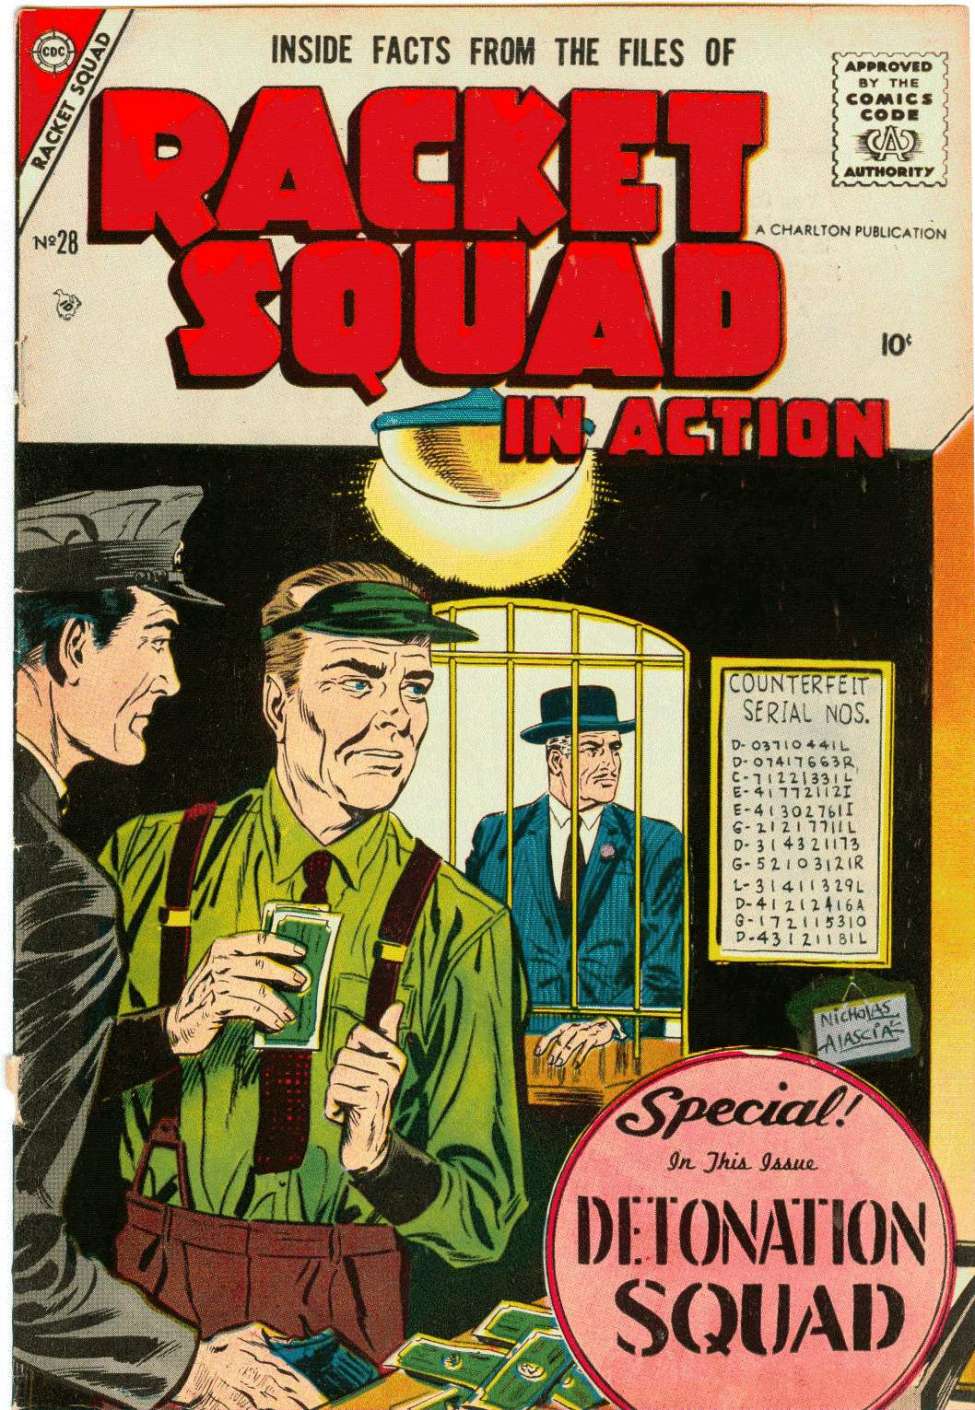 Comic Book Cover For Racket Squad in Action 28